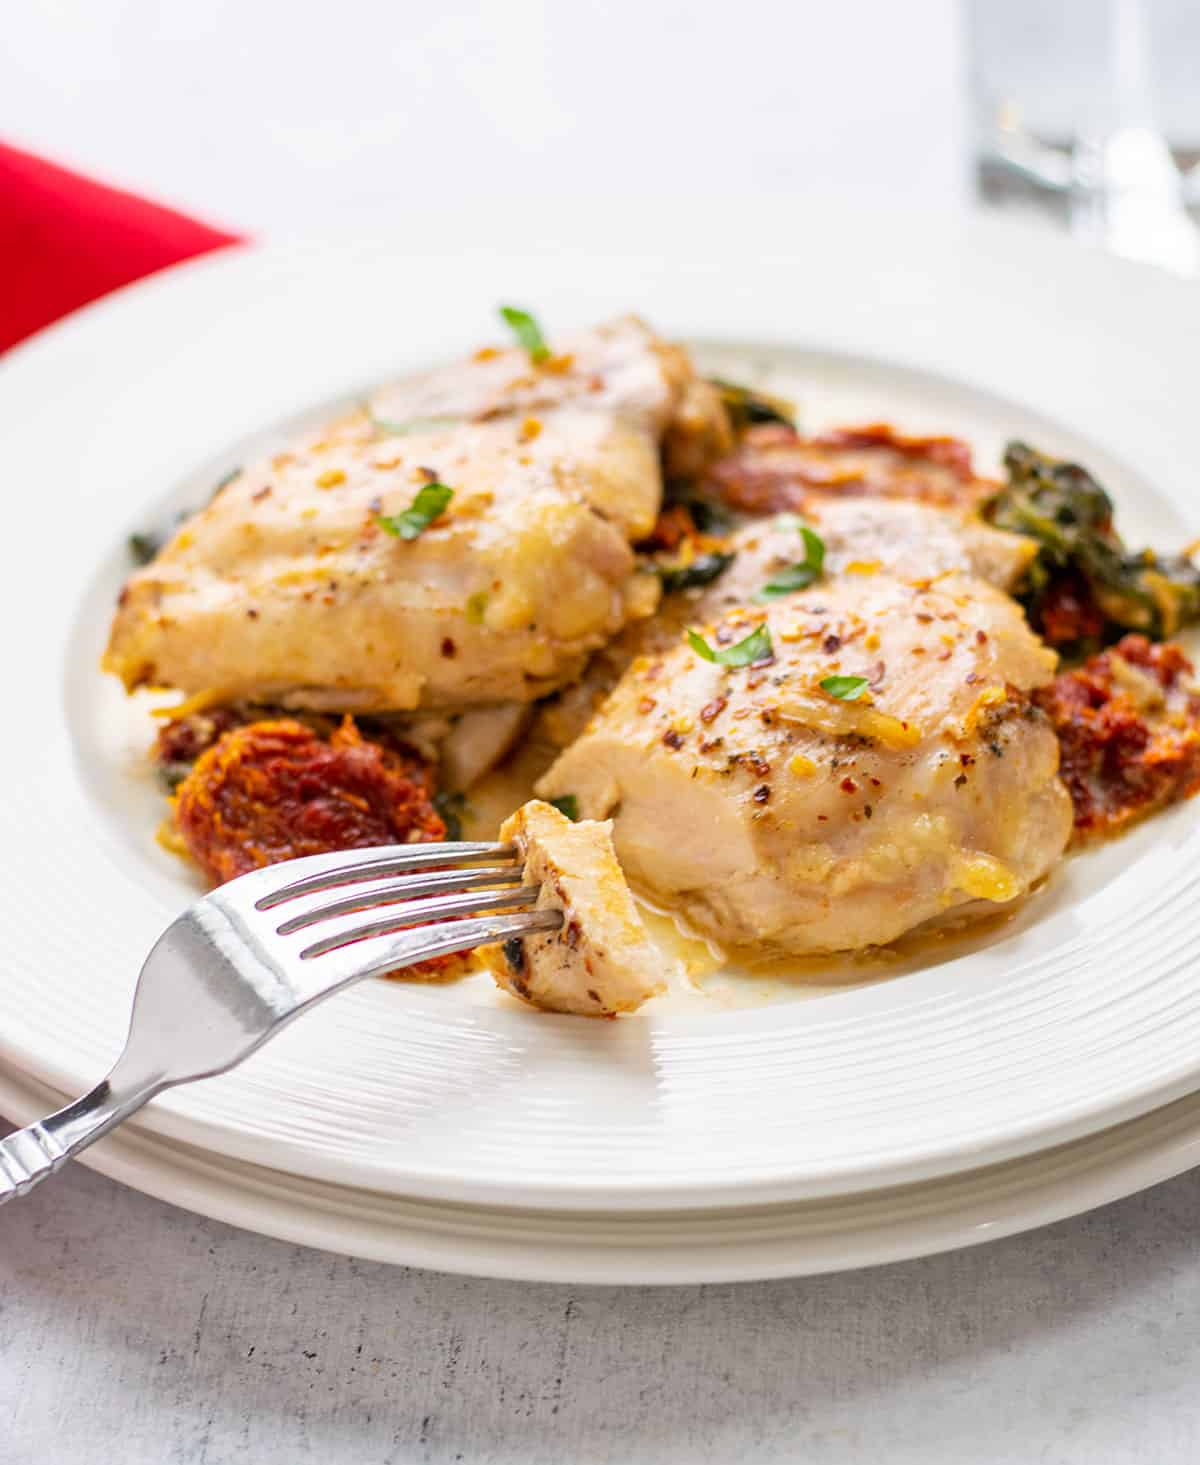 plate of chicken thighs with sun-dried tomato cream sauce garnished with basil